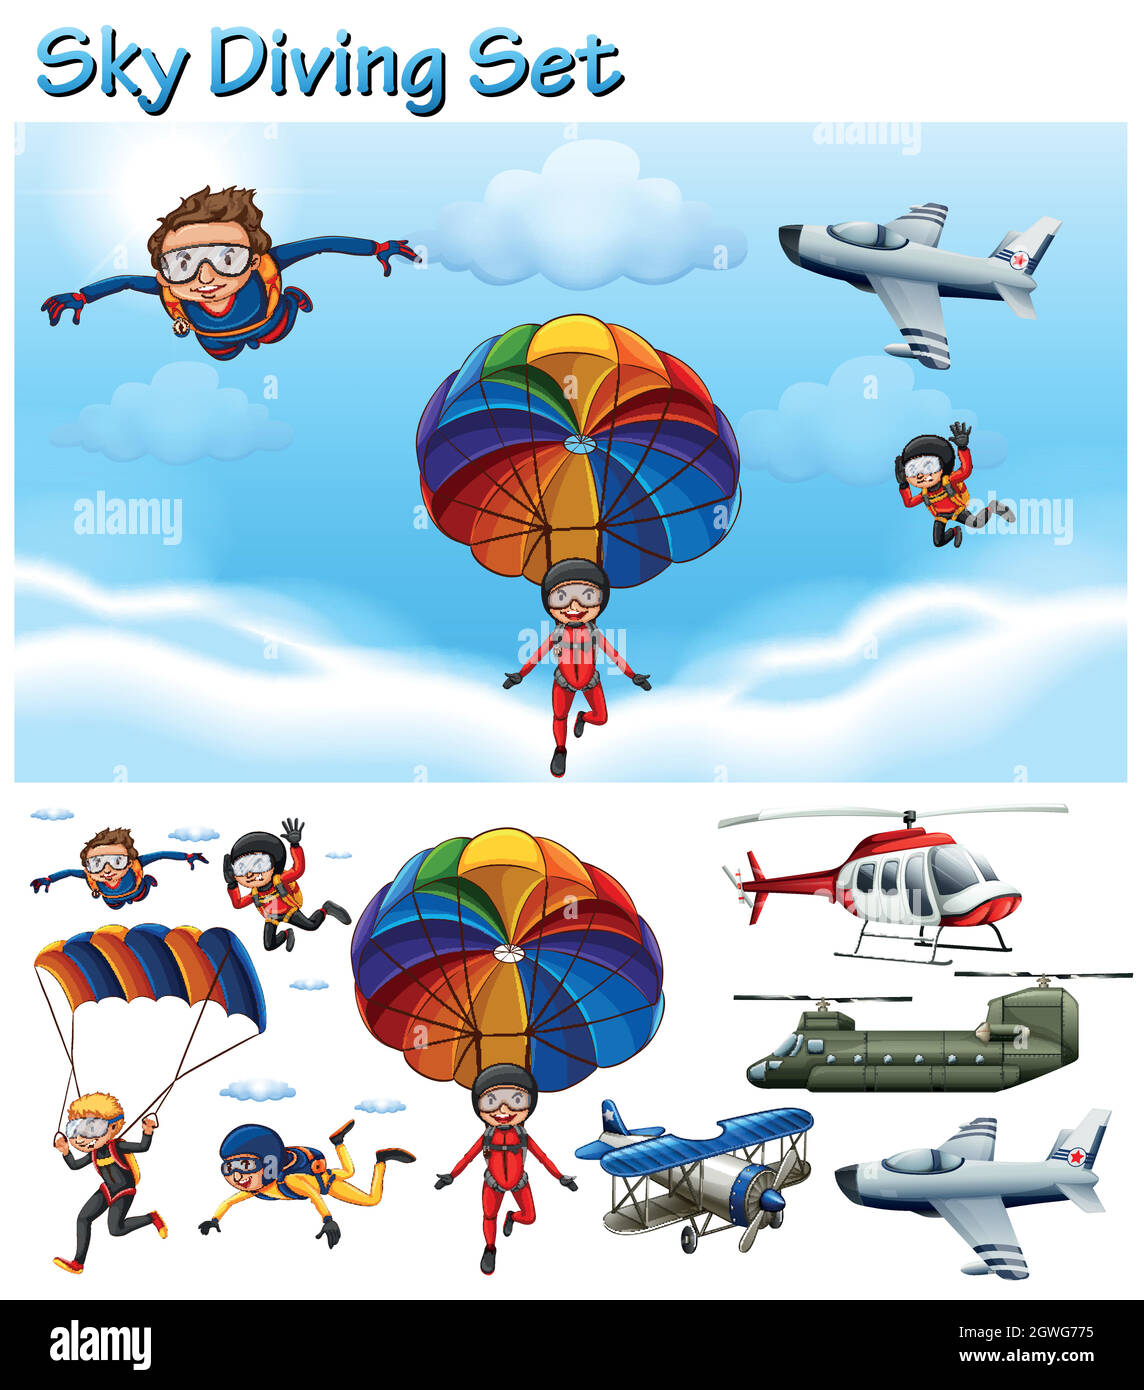 Sky diving set with people and equipment Stock Vector